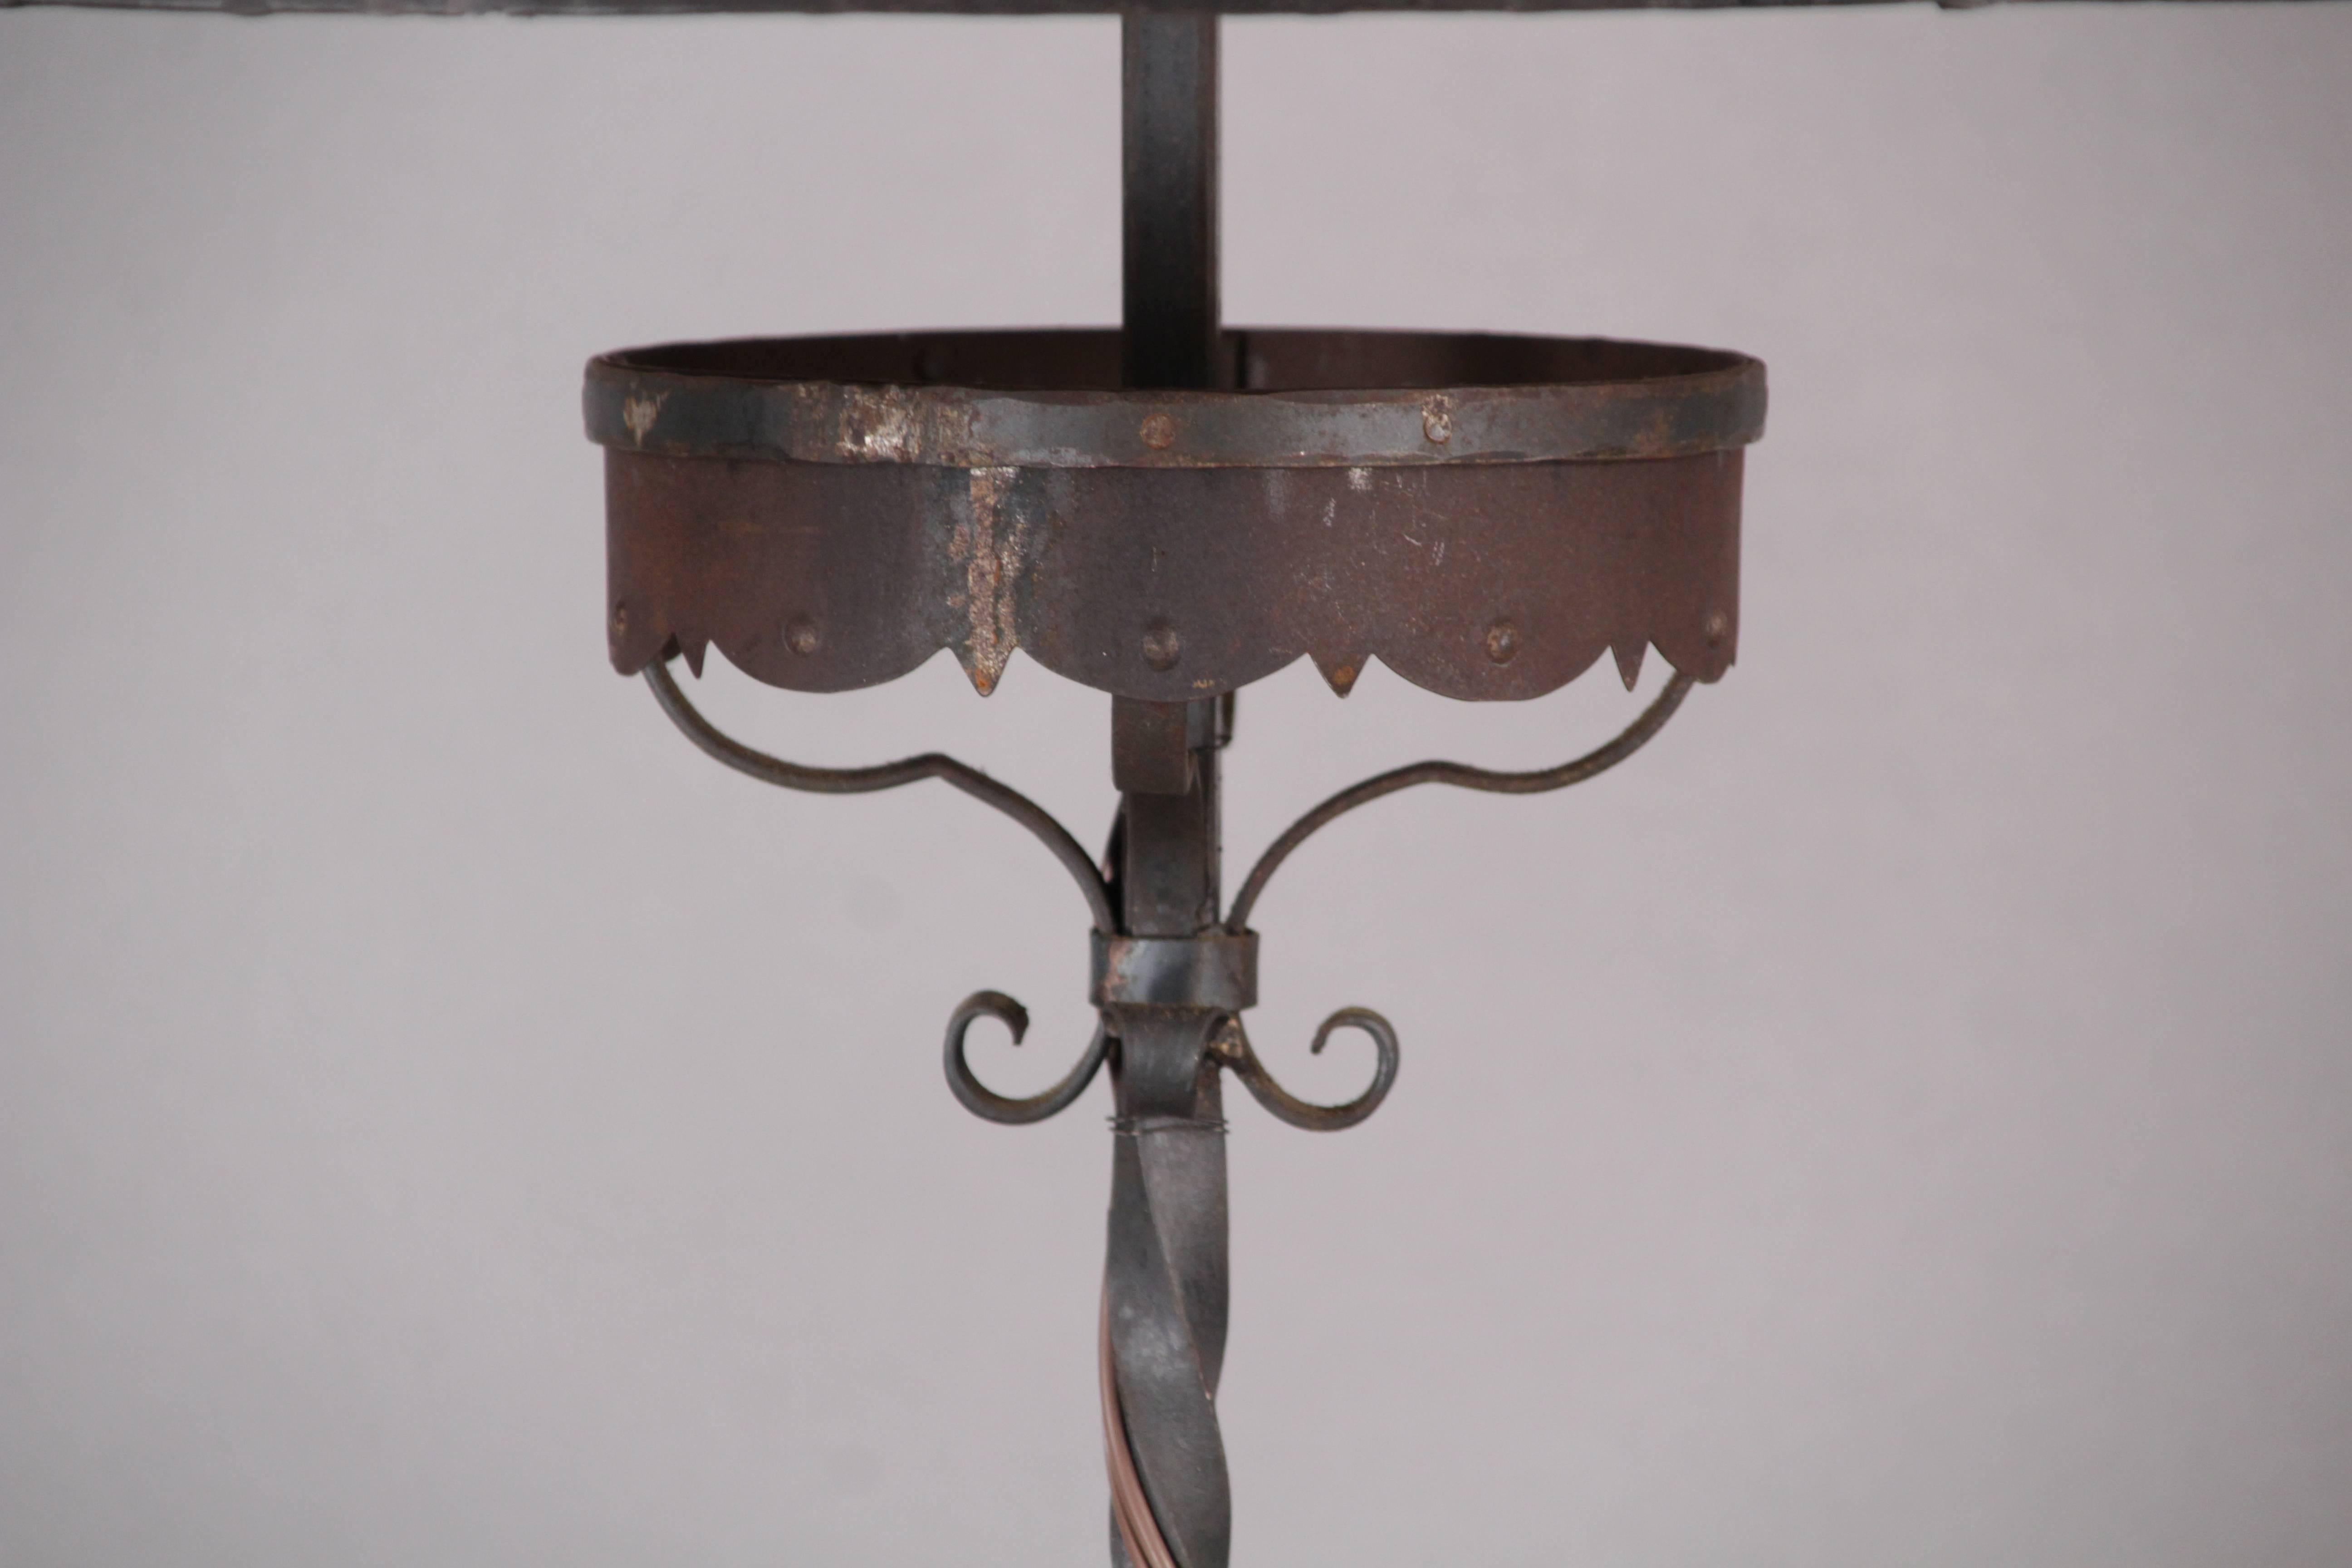 Tall wrought iron floor lamp with wrought iron riveted mica shade, circa 1920s. Great tall wrought iron base.